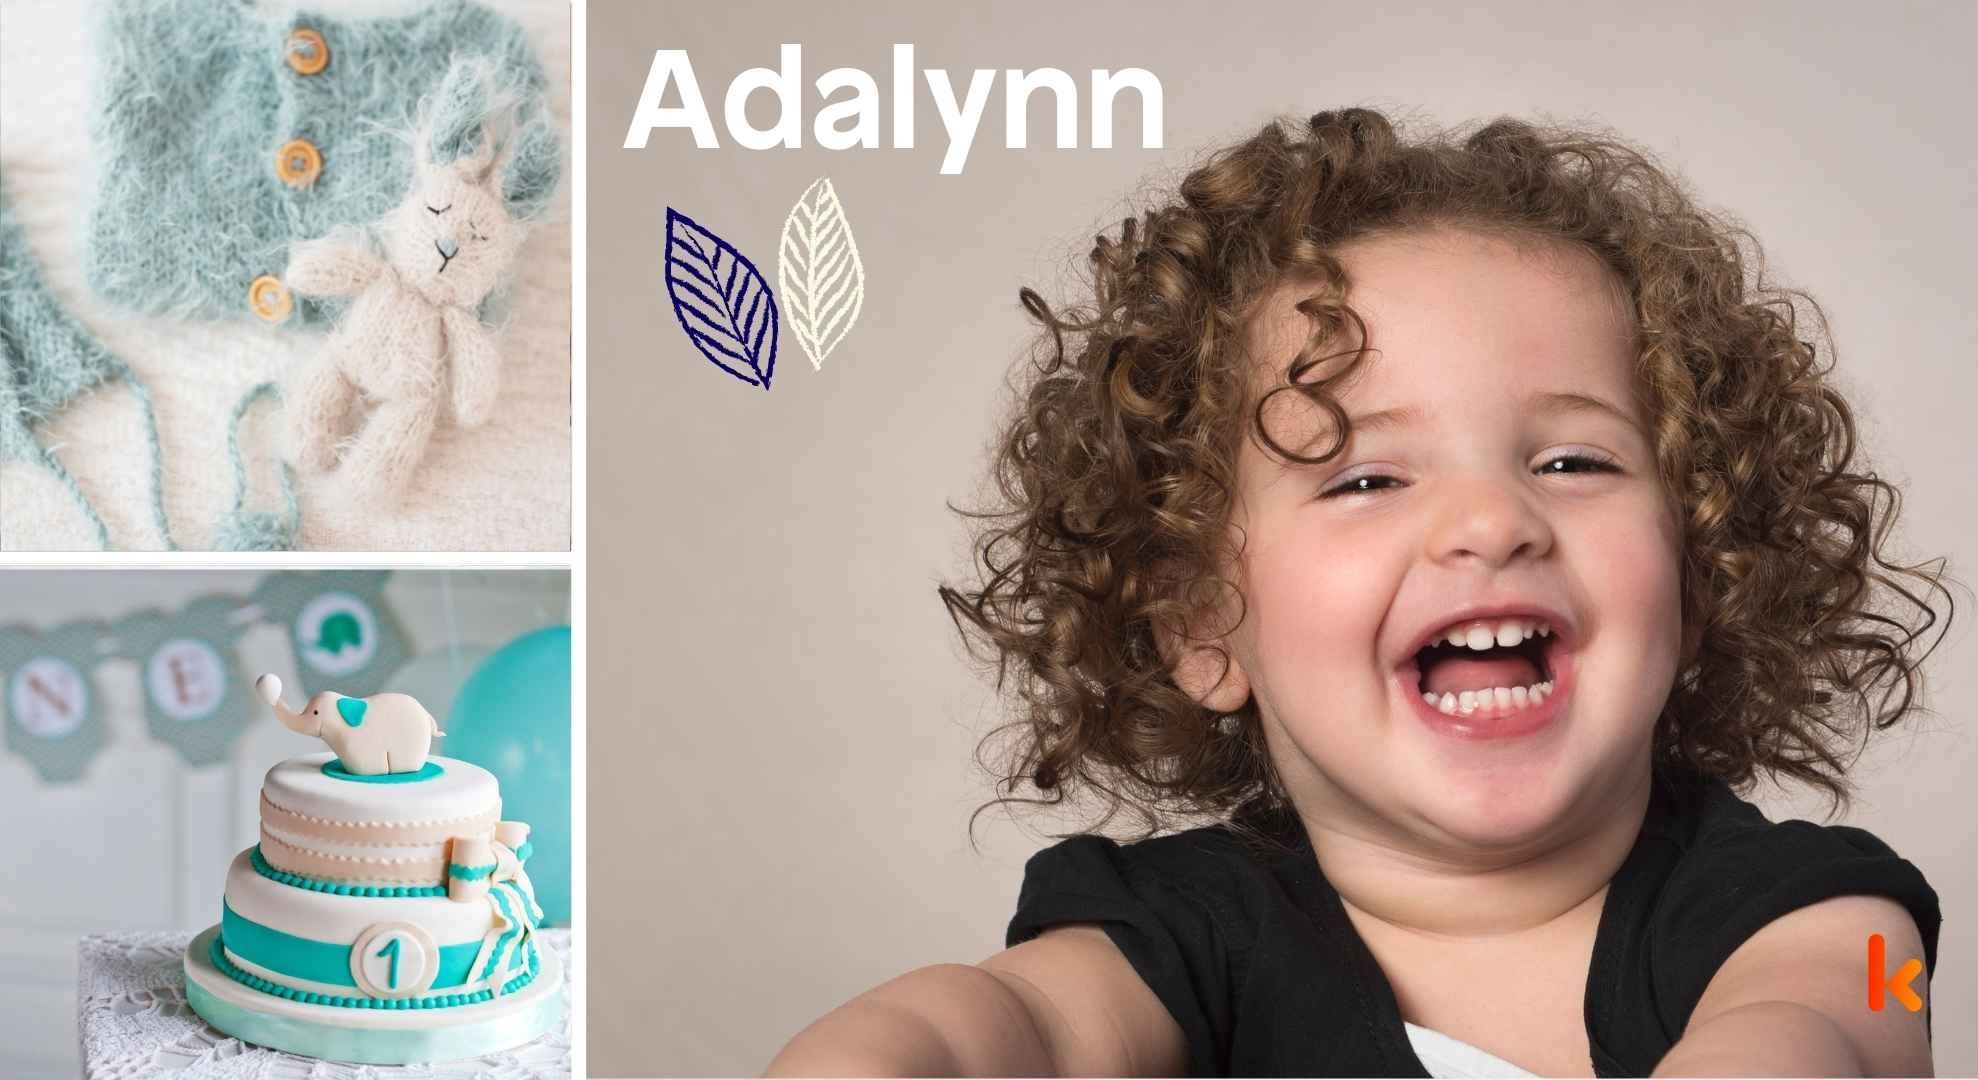 Baby name Adalynn - cute baby, clothes, cake